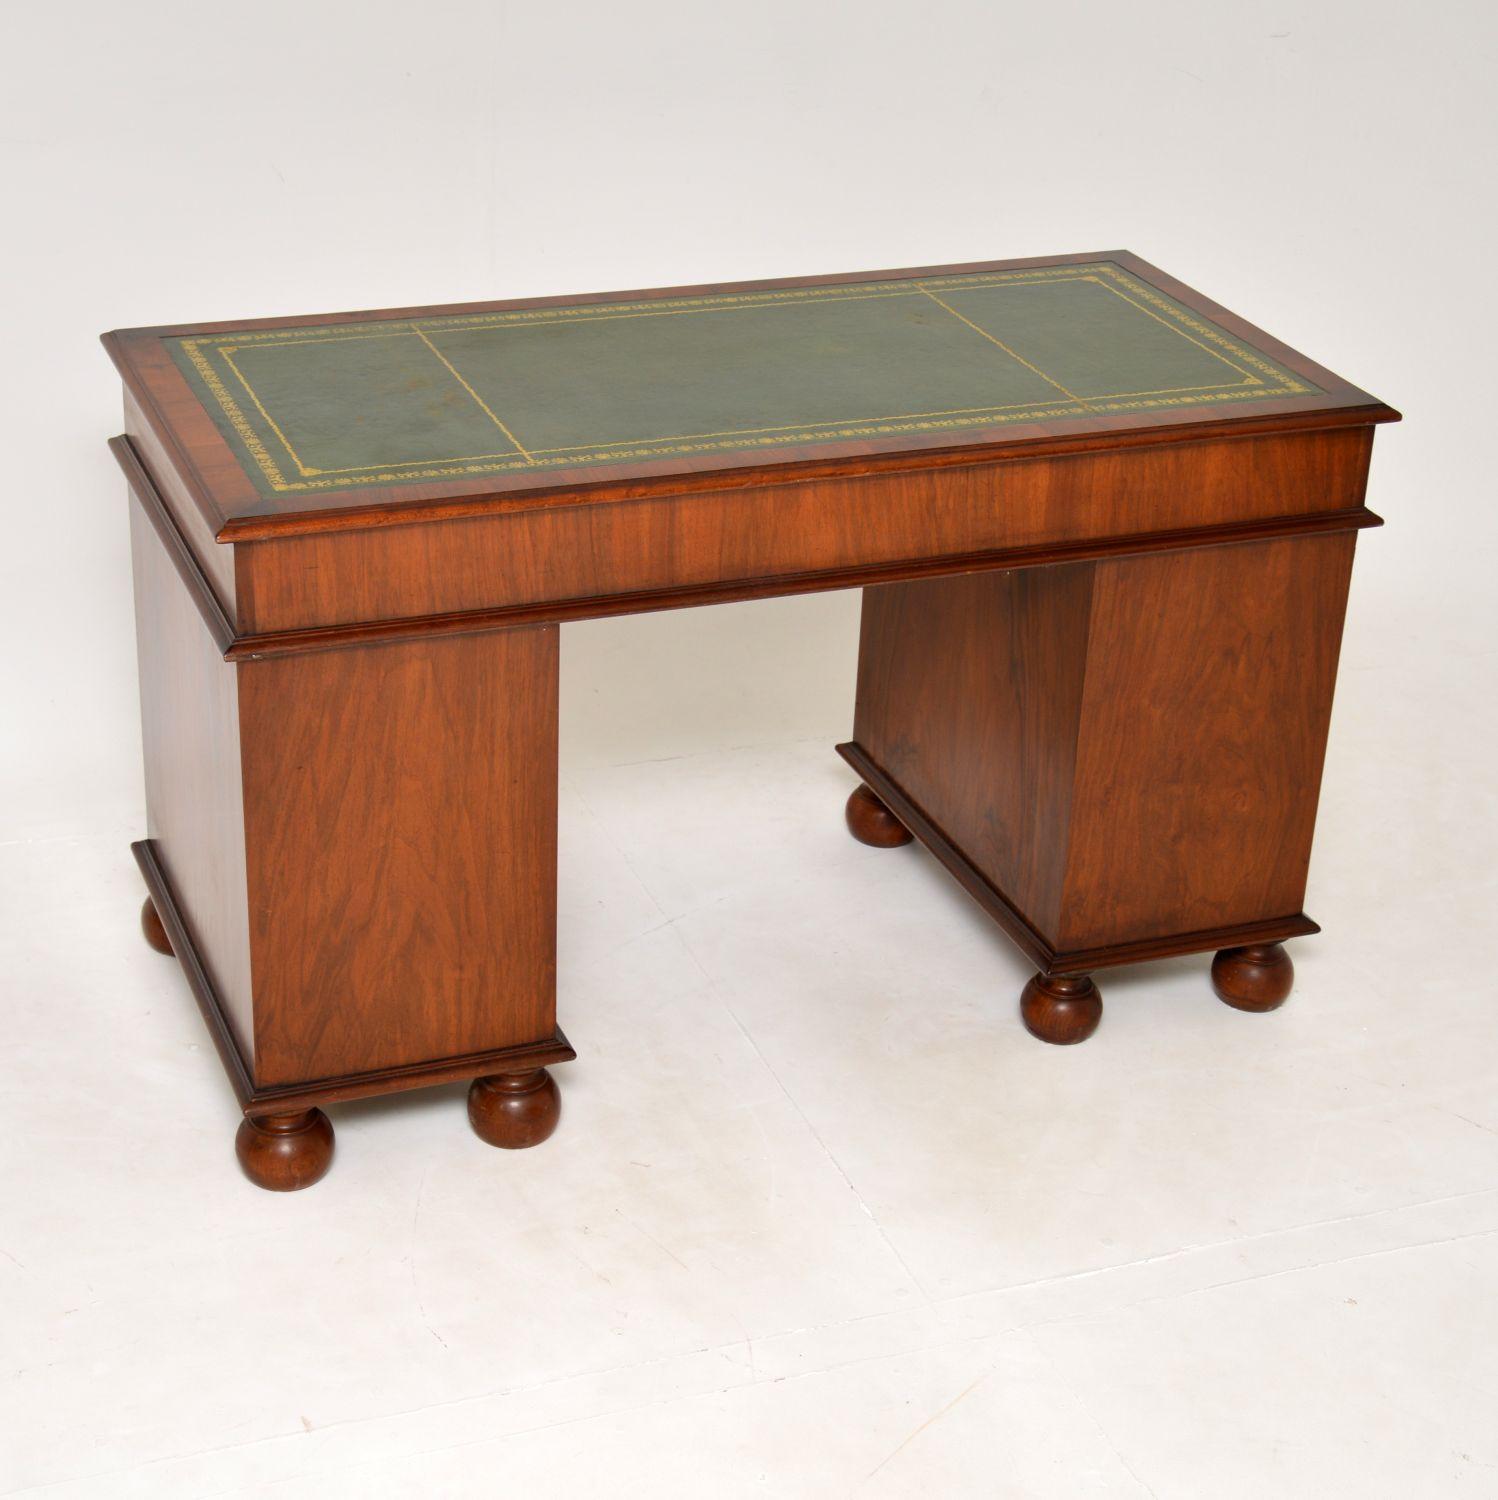 William and Mary Antique William & Mary Revival Desk in Walnut